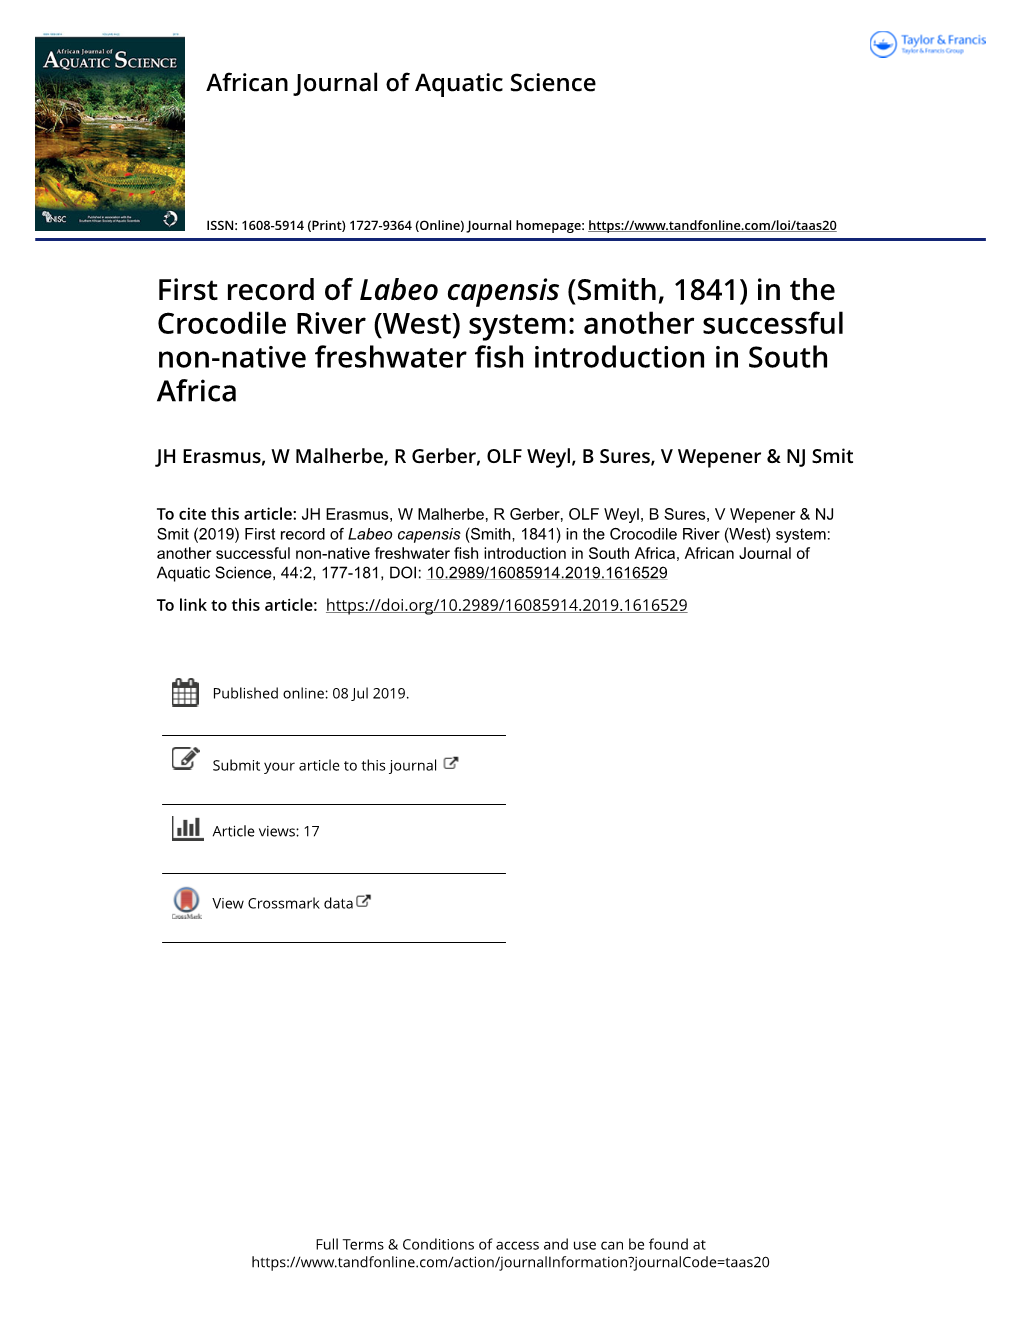 Another Successful Non-Native Freshwater Fish Introduction in South Africa